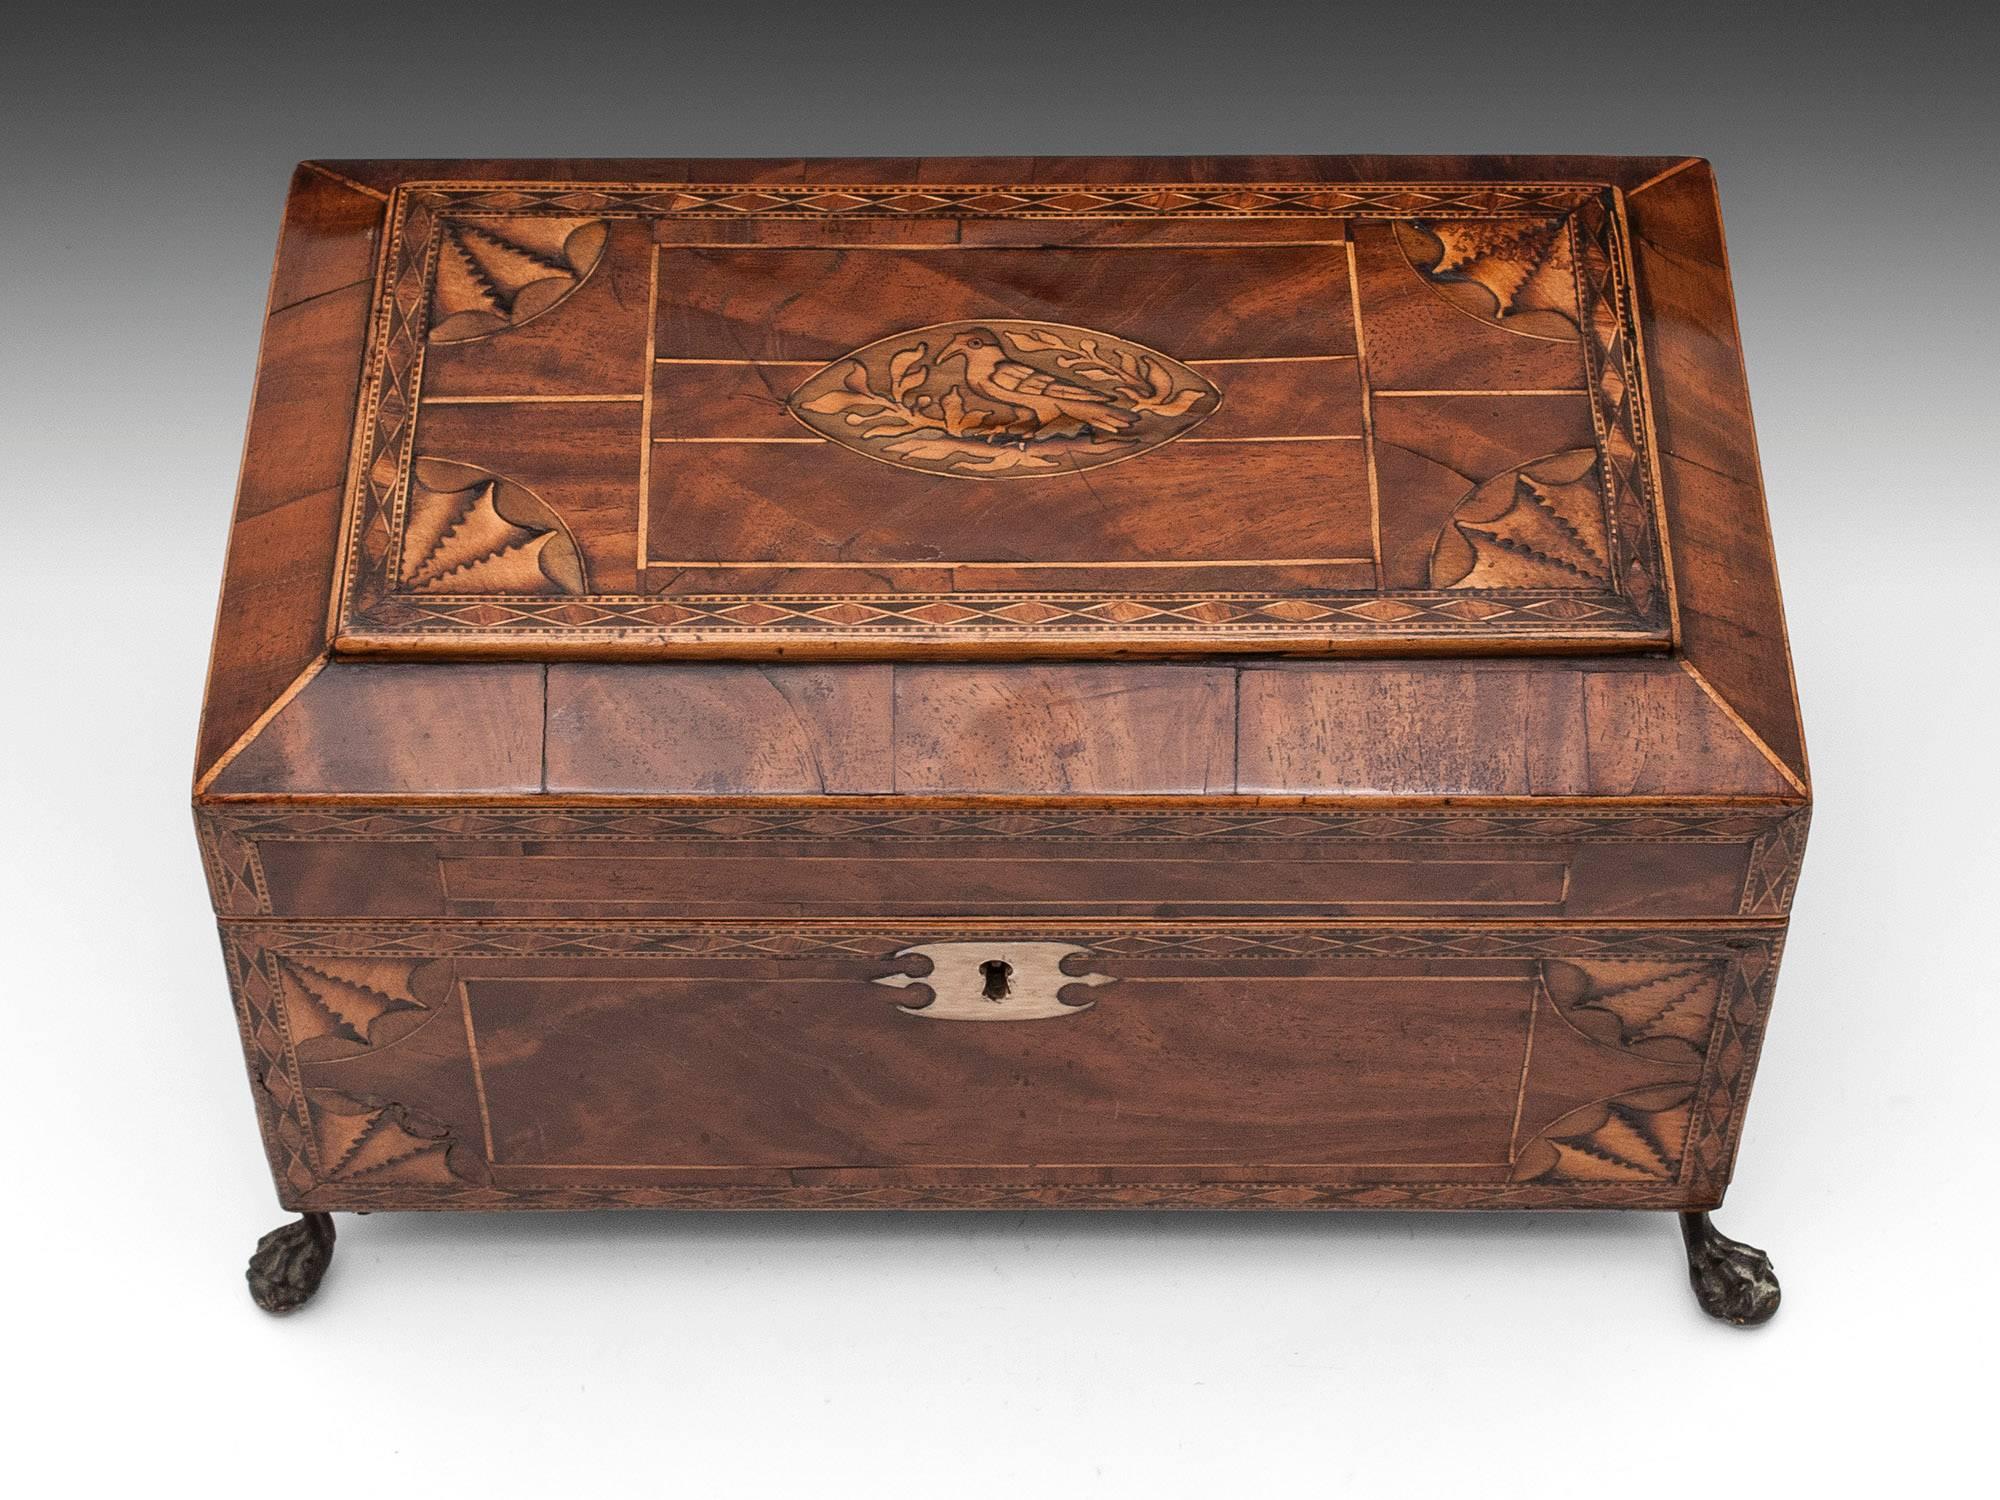 Flame Mahogany Tea Chest with beautiful patination, diamond shaped banding and quarter fan inlays. Standing on four brass ball and claw feet. The top is inlaid with a naive bird perched on a branch. 

The interior features the original quartered